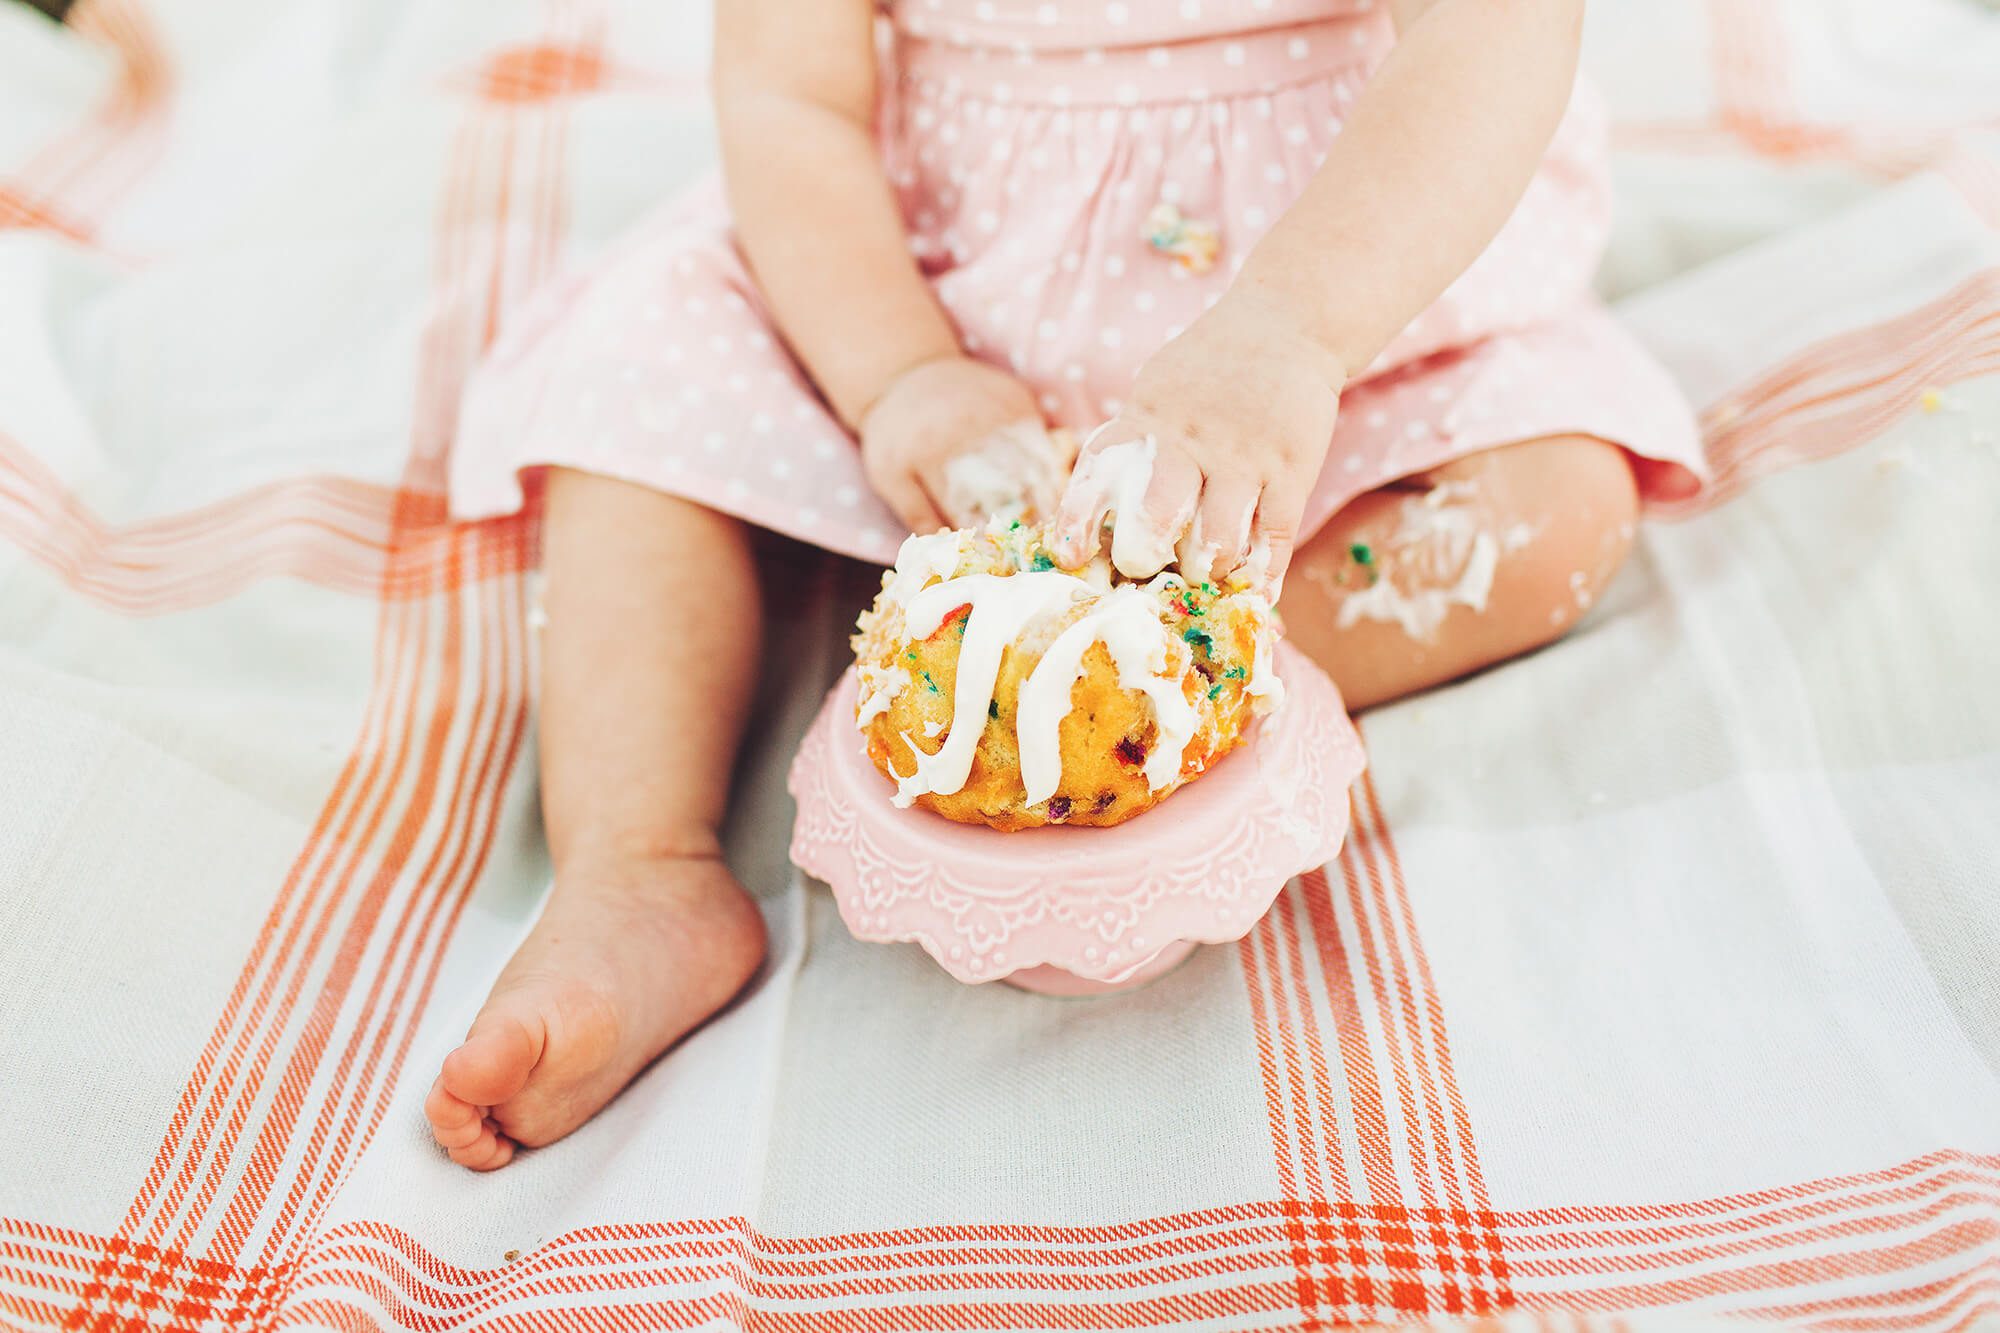 This little girl loved her colorful, fall bundt cake for her first birthday